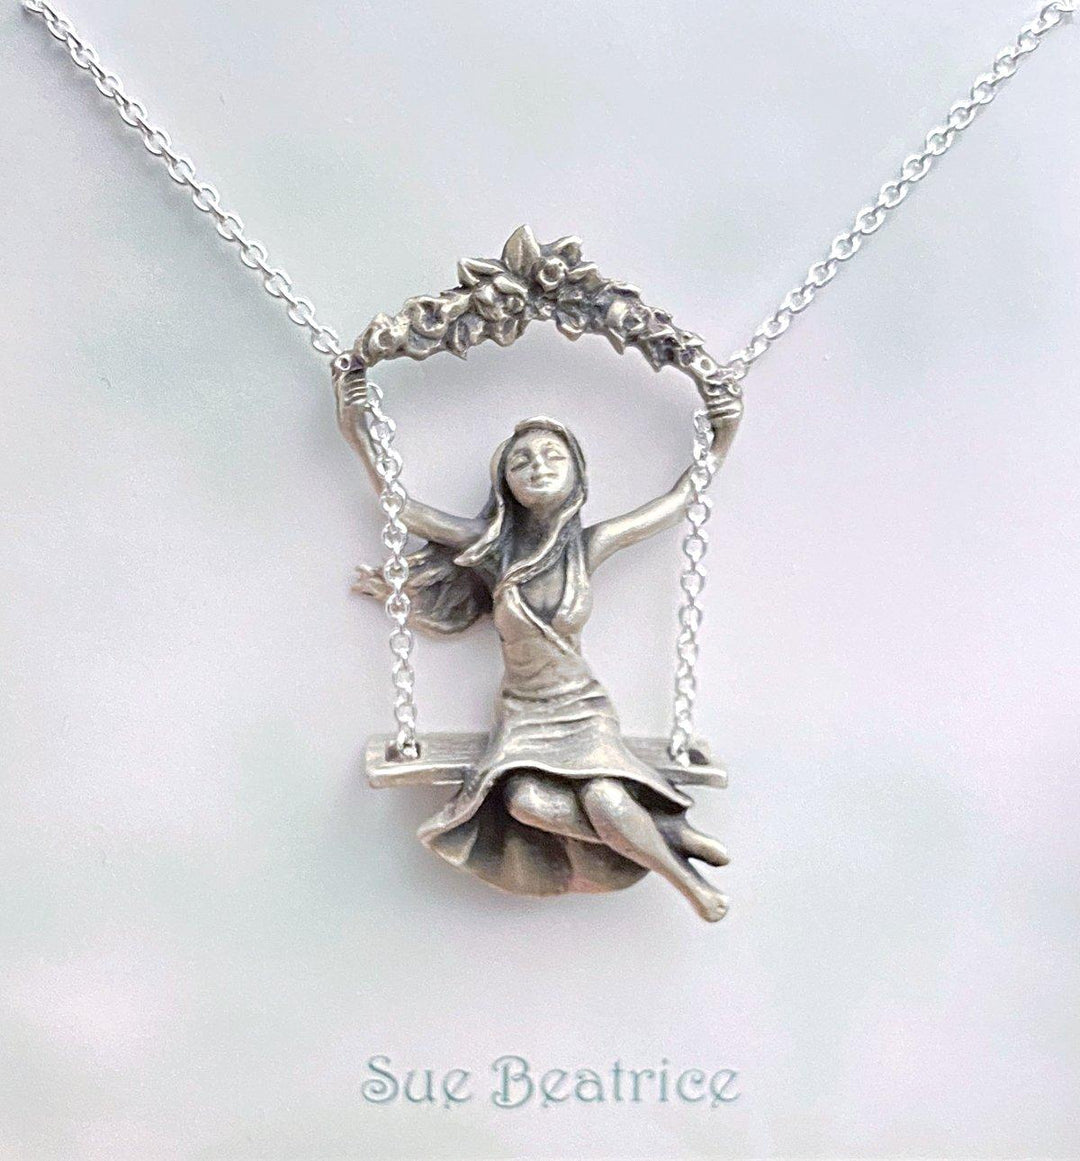 Girl on the Swing pendant on light-colored card - Sterling Silver necklace with intricate design, capturing childhood joy